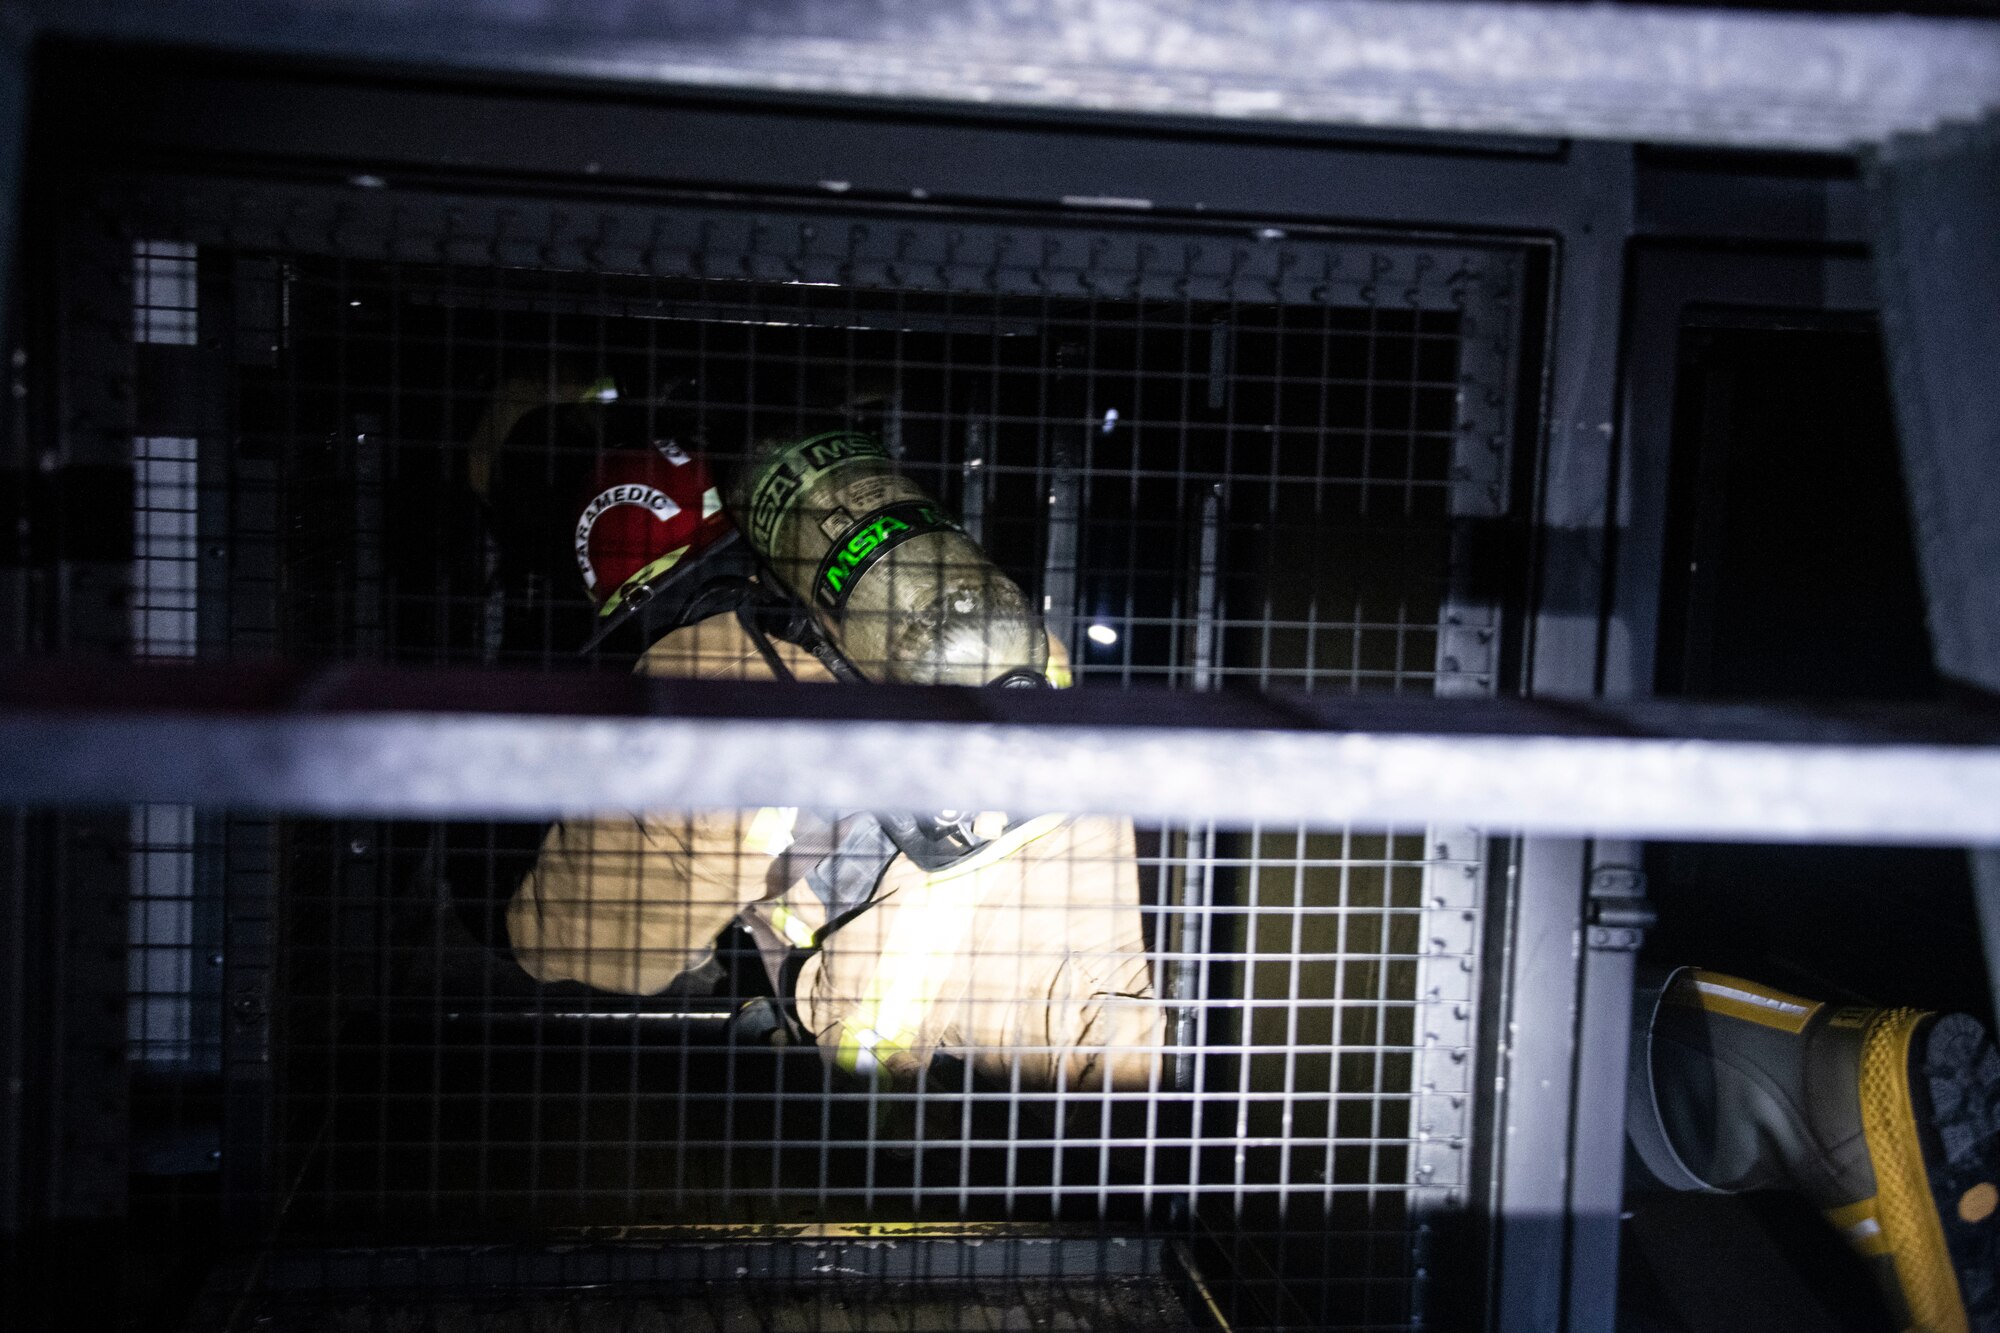 U.S. Air Force Master Sgt. Joseph Duffy, 97th Mission Support Group first sergeant, makes his way through the Confined Space Trainer